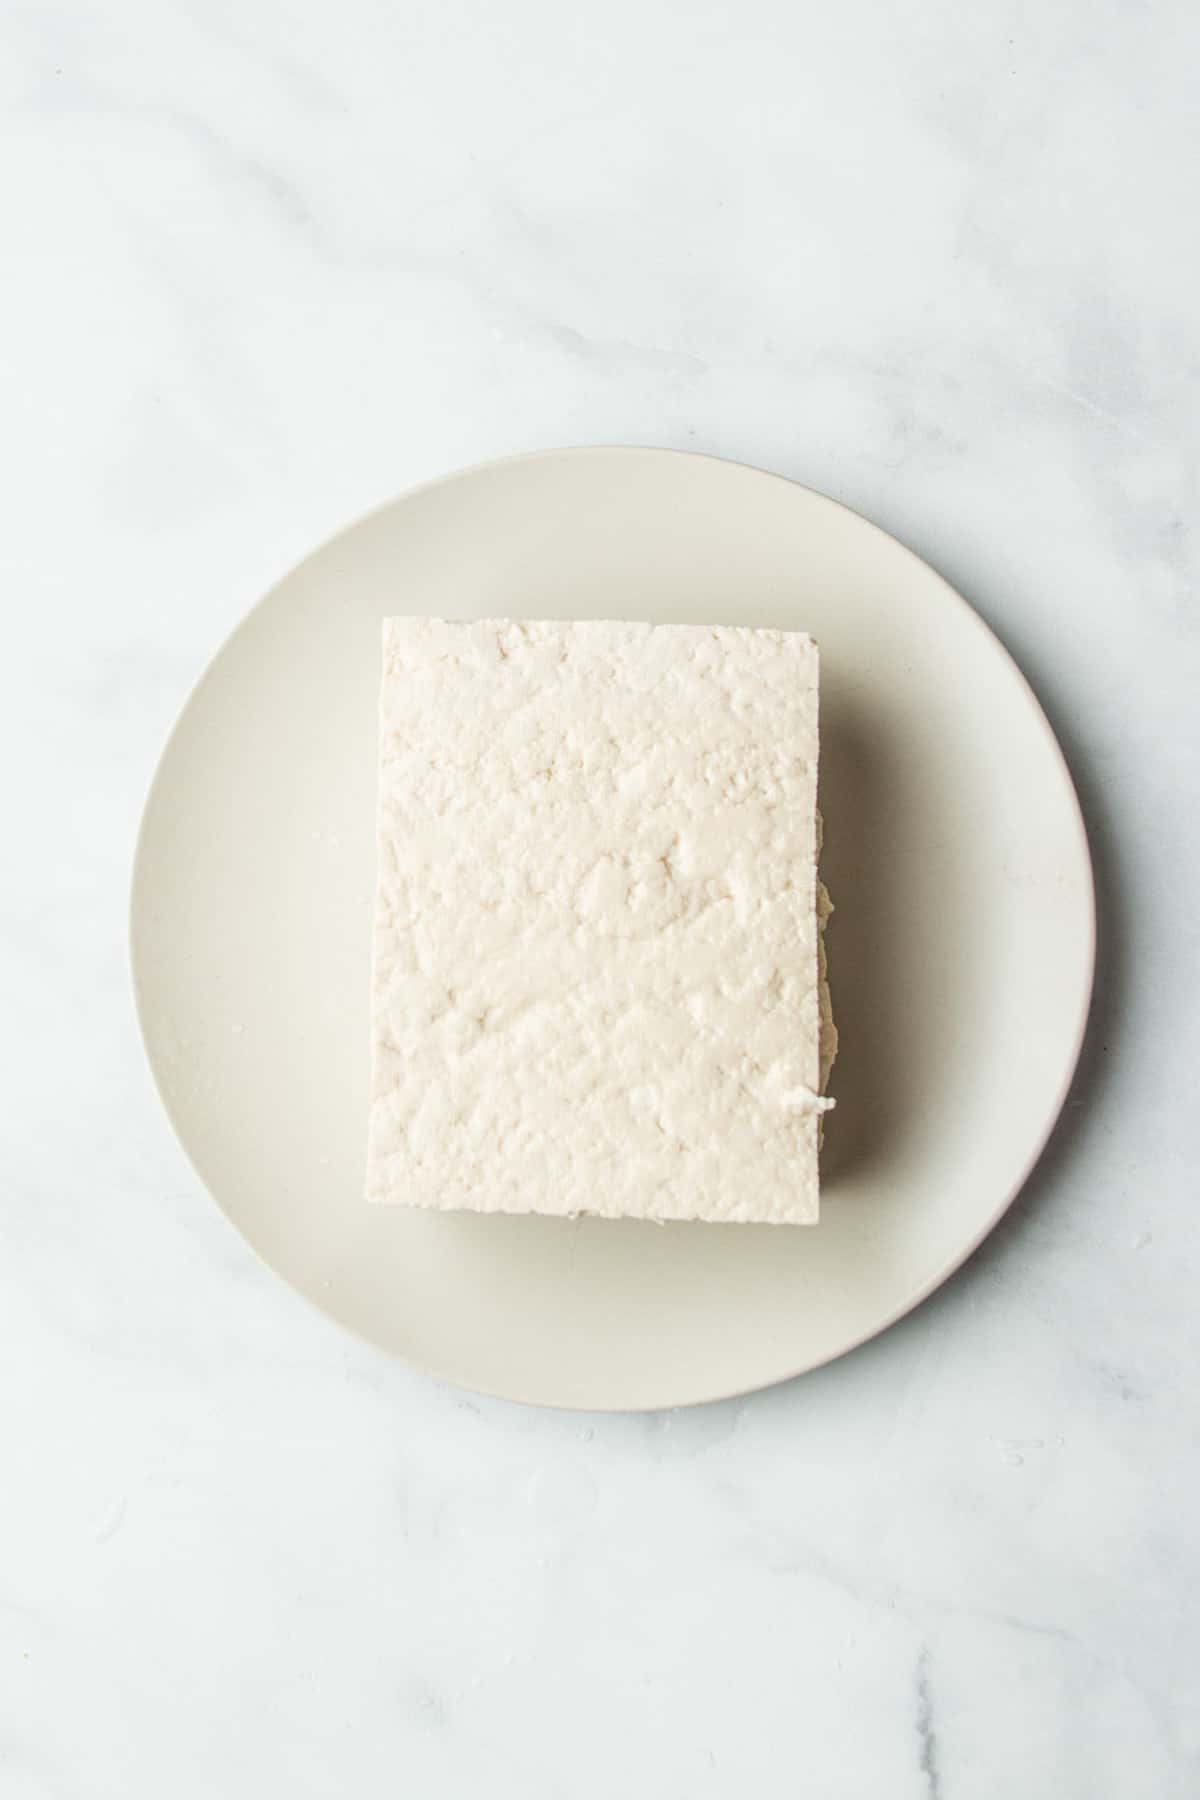 Block of tofu sitting on a white plate.